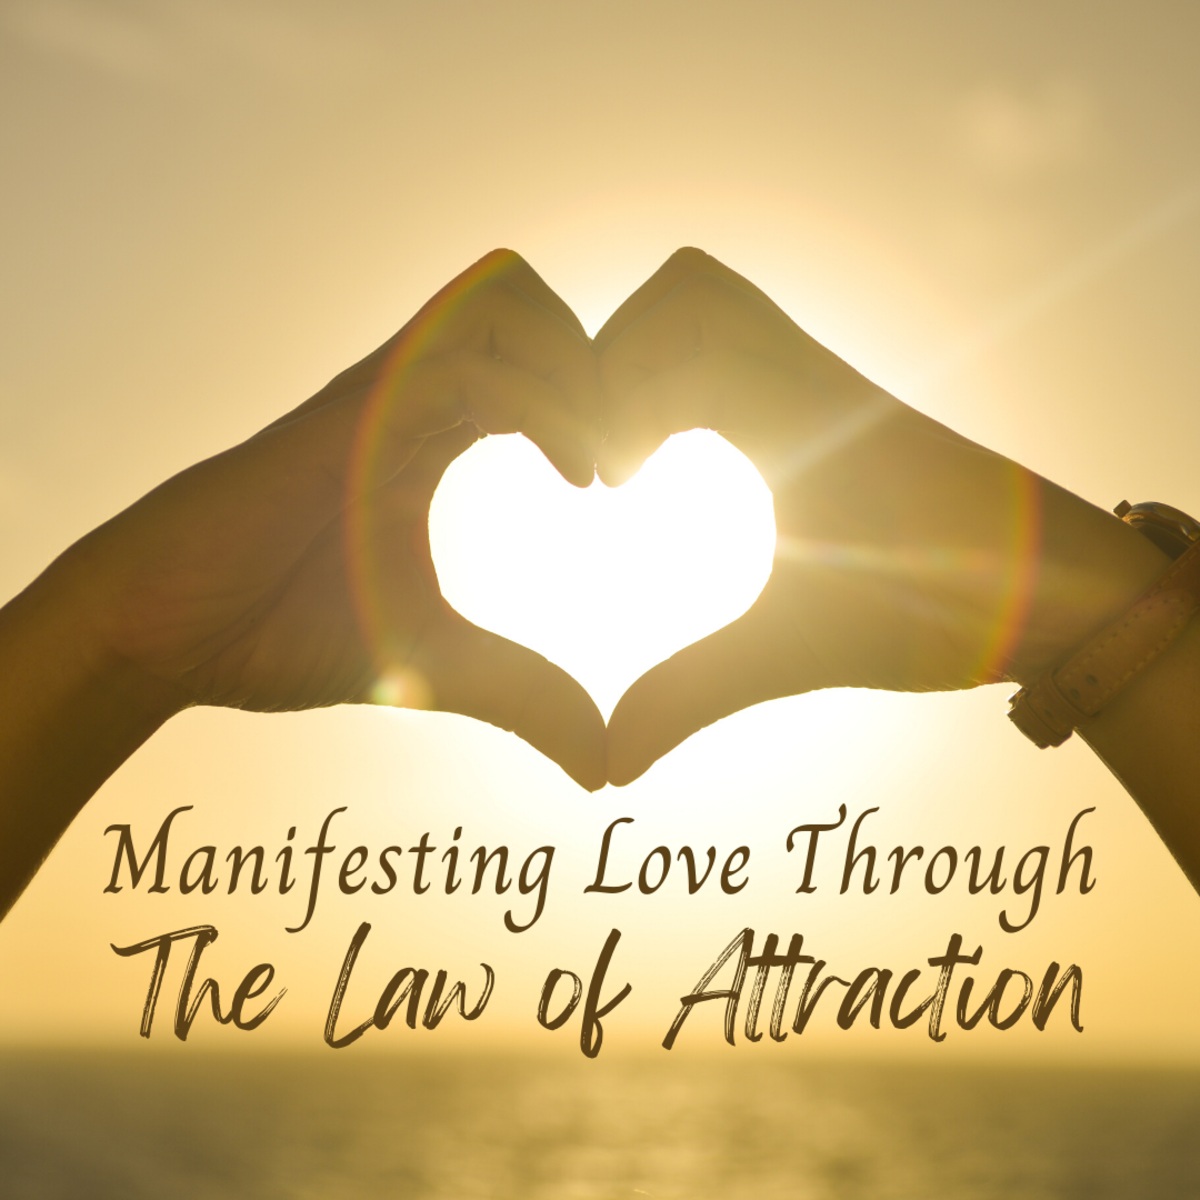 How to Manifest Love: 7 Ways to Use the Law of Attraction to Find a Relationship